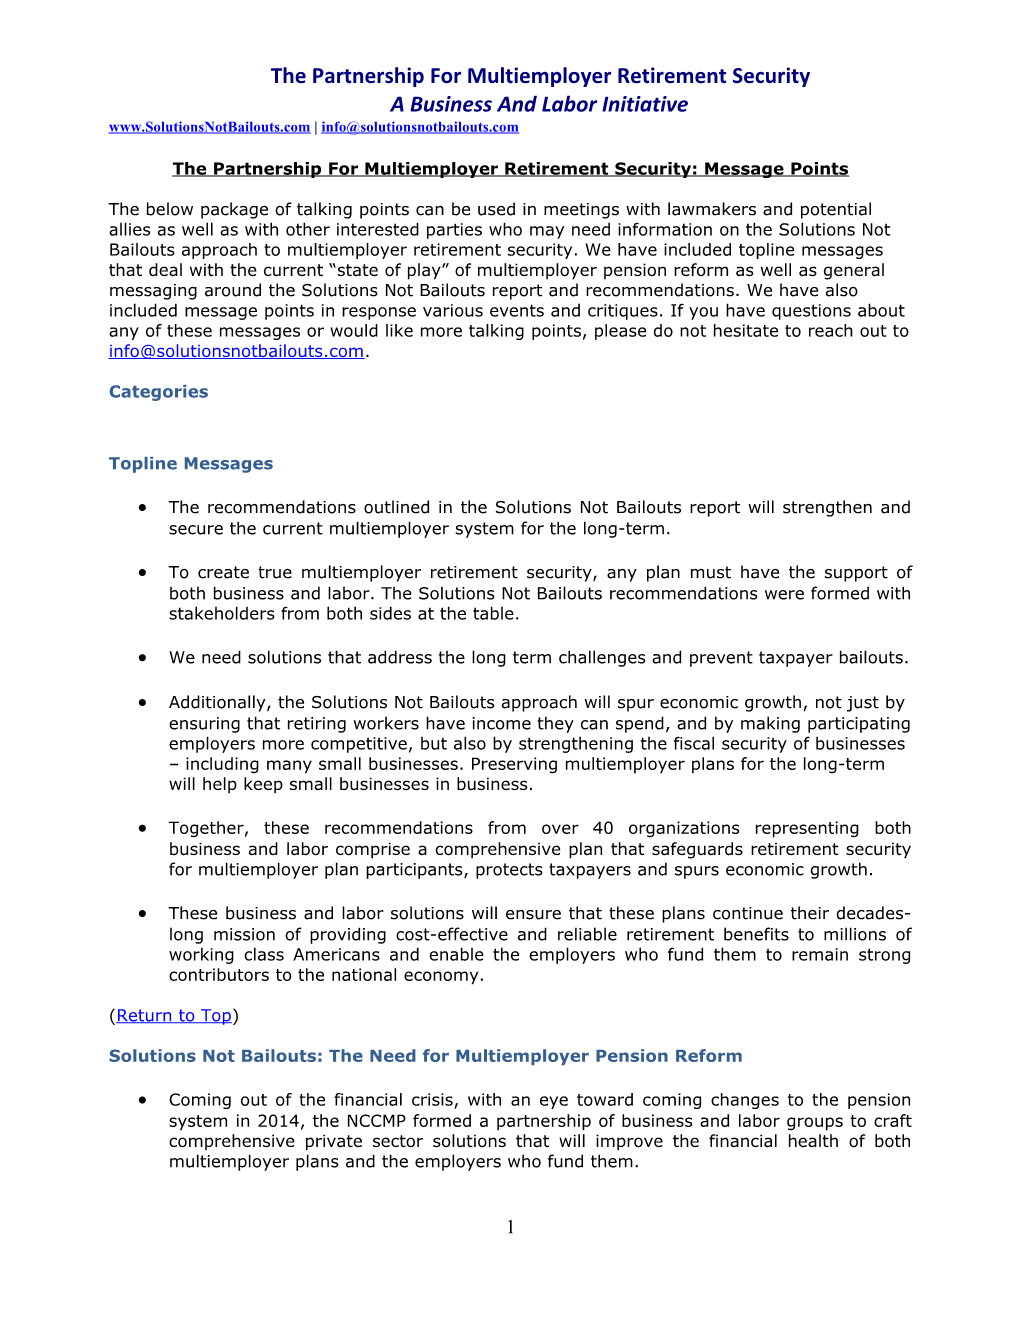 The Partnership for Multiemployer Retirement Security